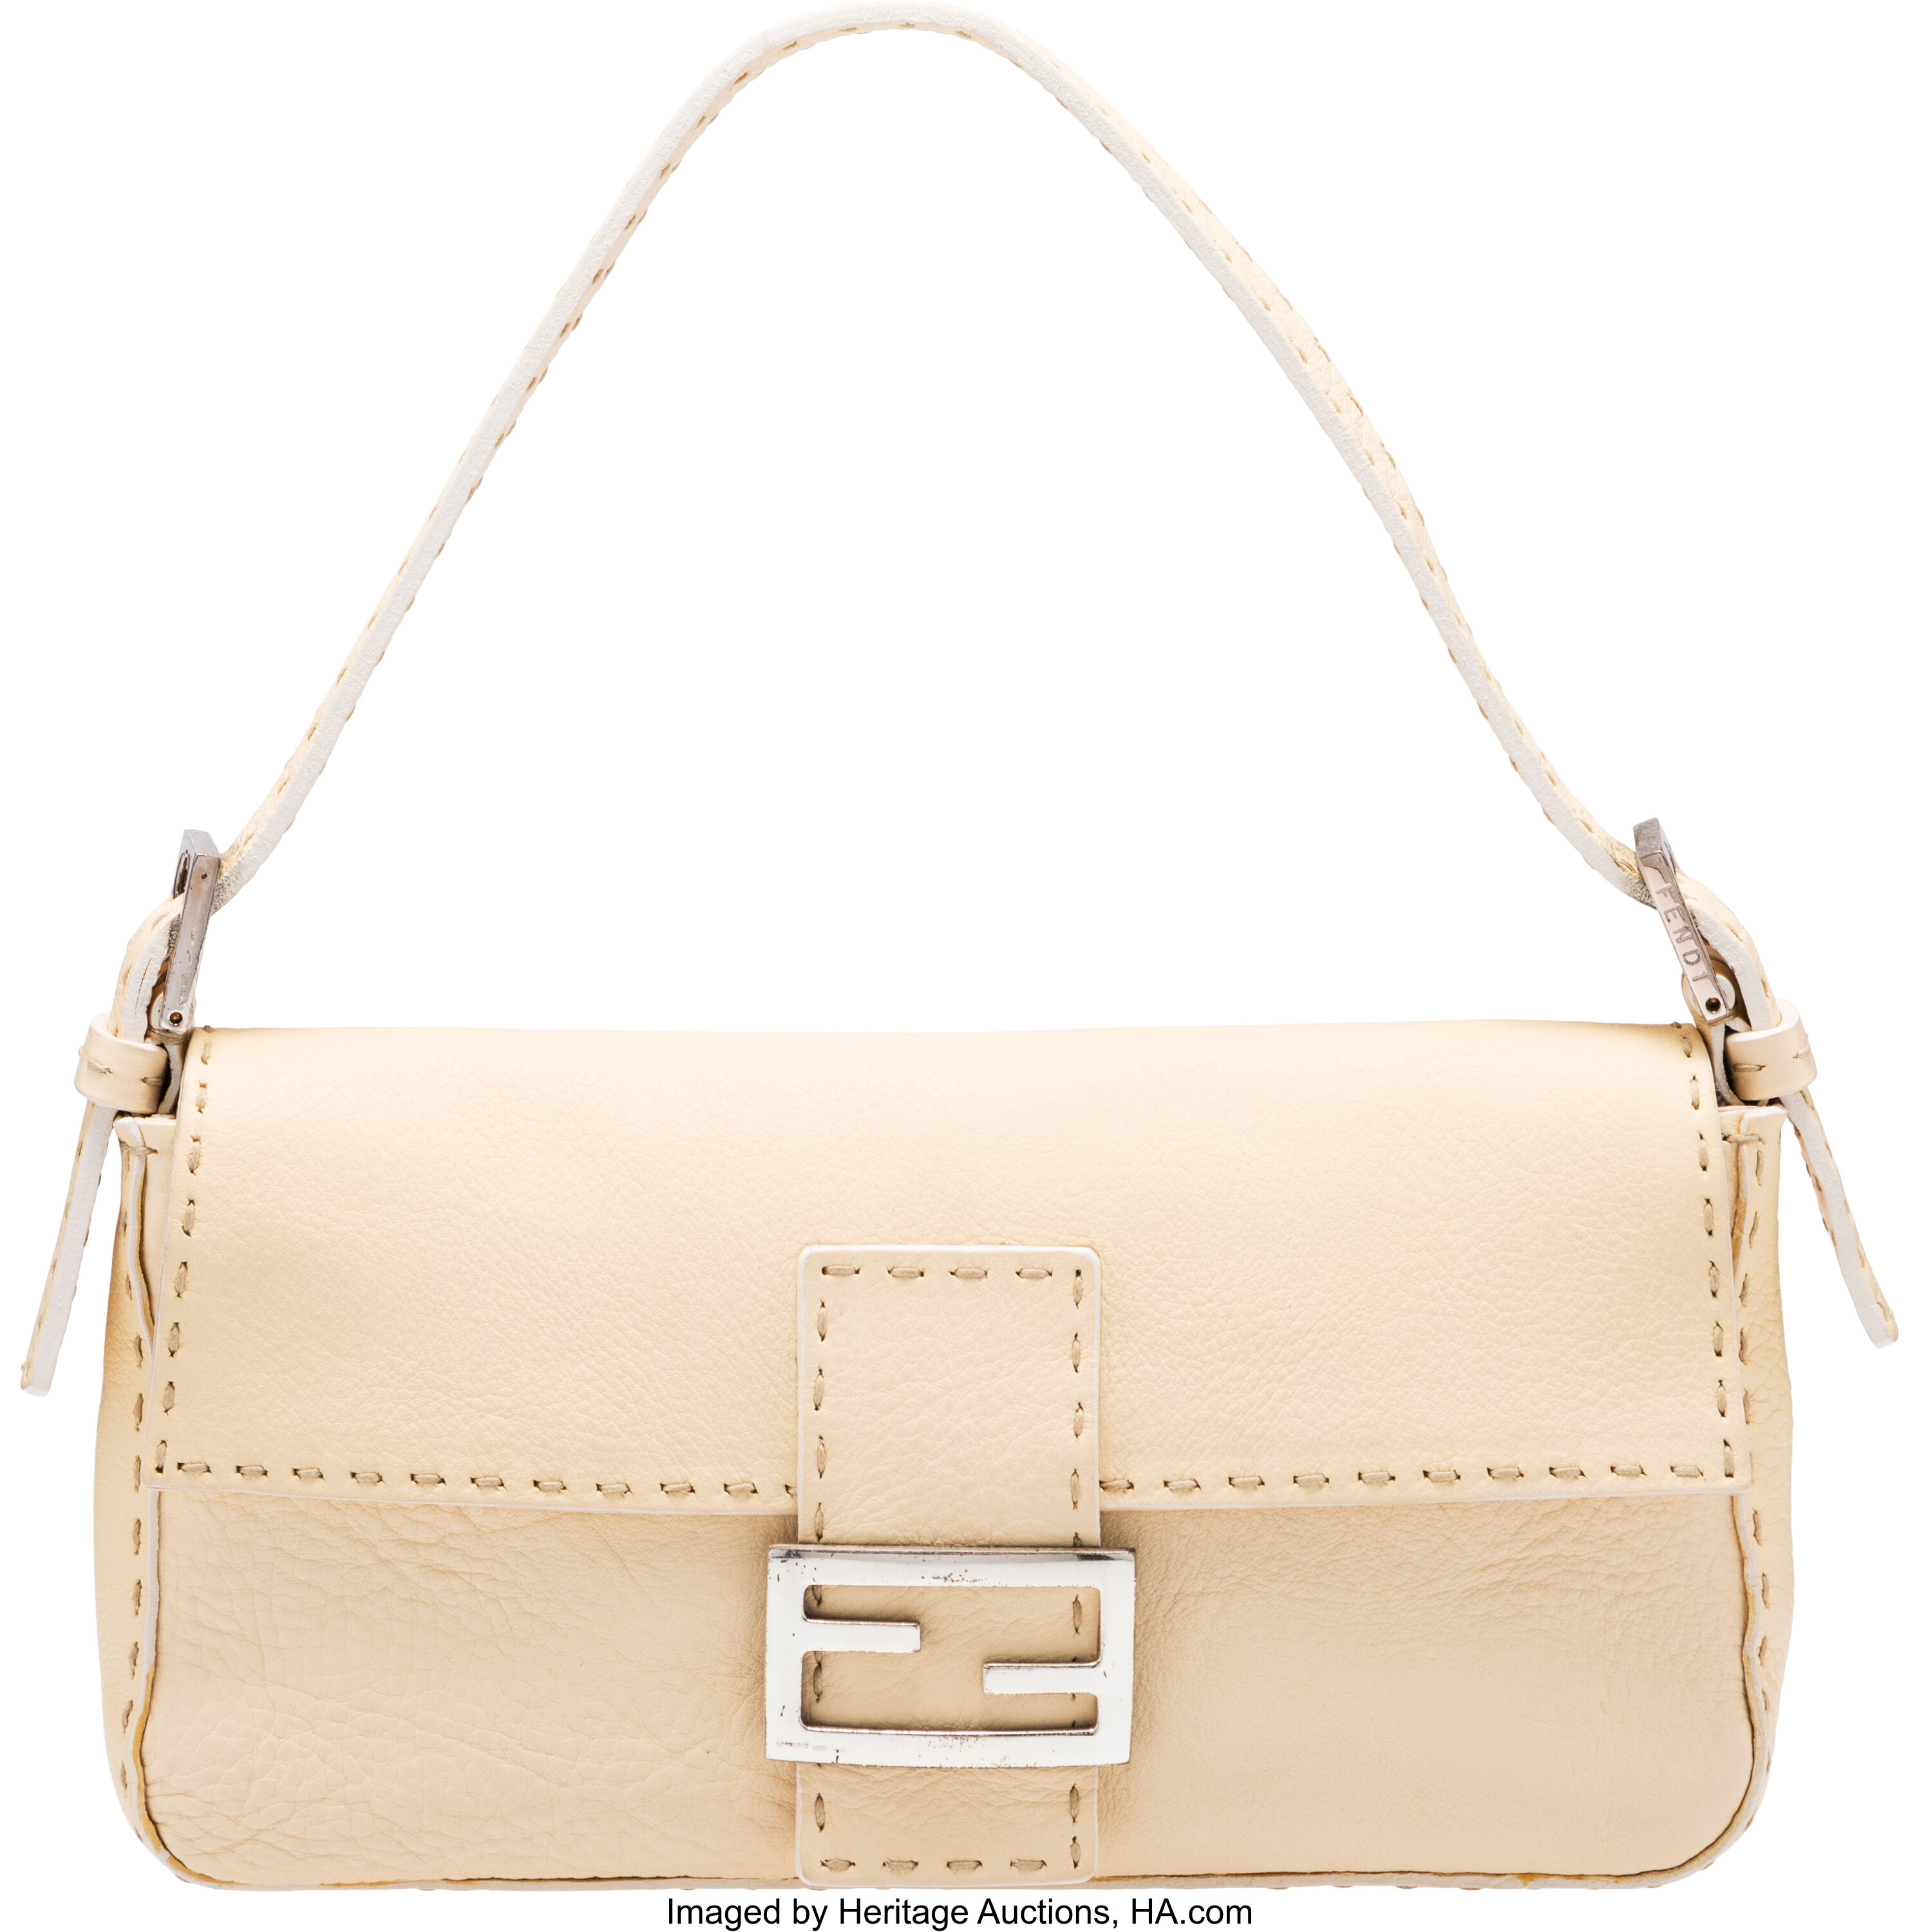 Fendi Light Beige Leather Small Baguette Bag. The Collection of | Lot ...